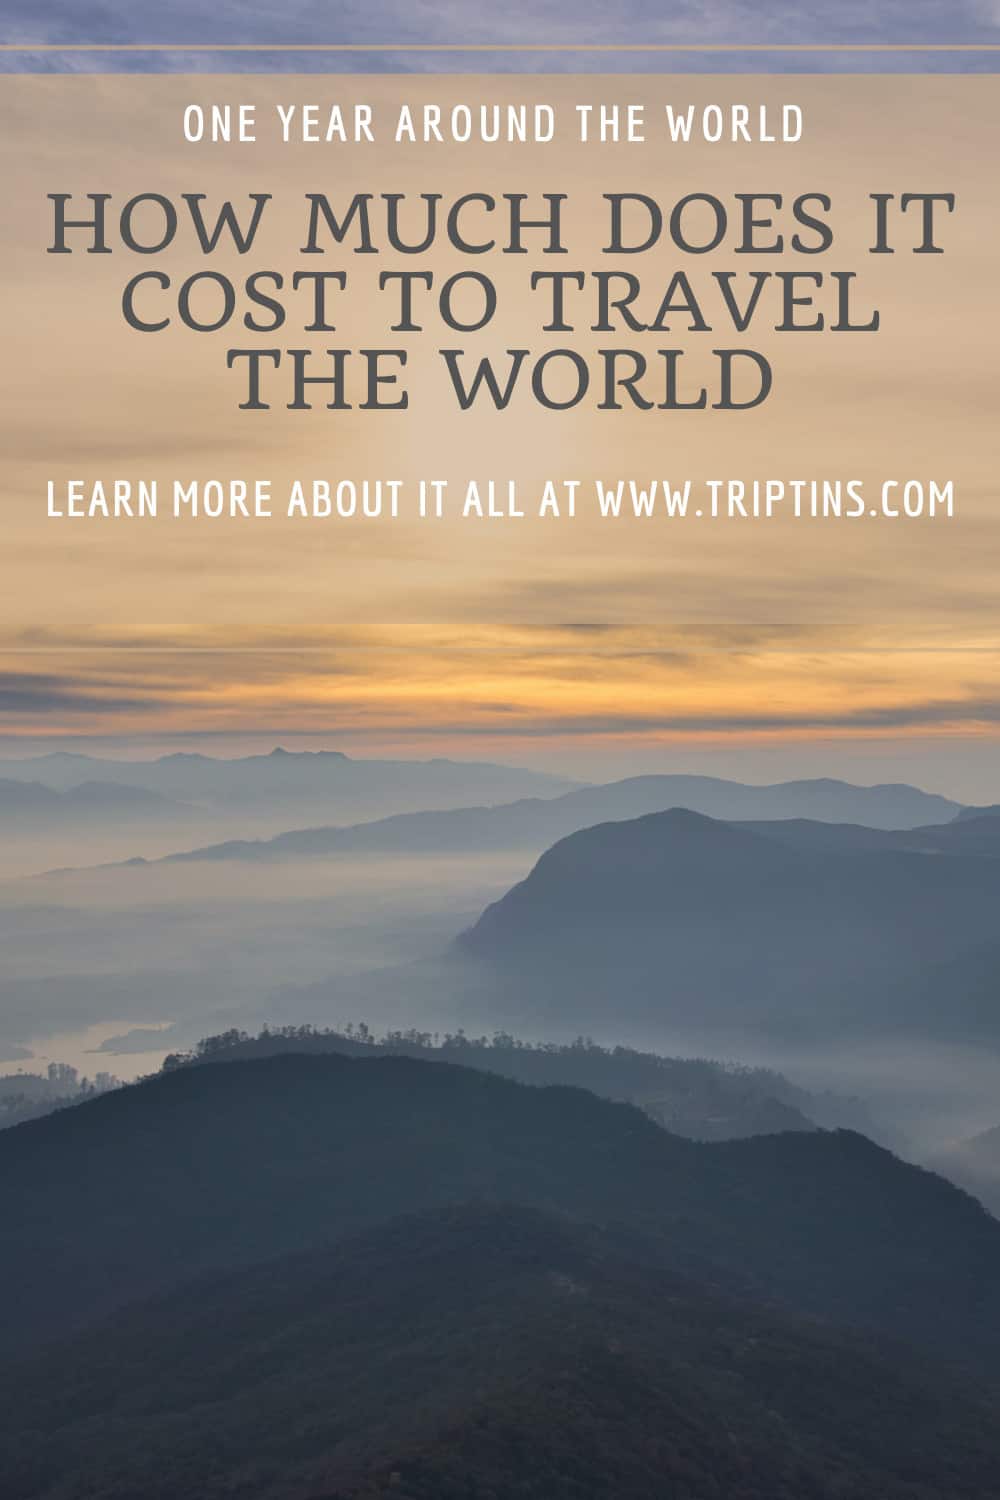 How Much Does it Cost to Travel the World